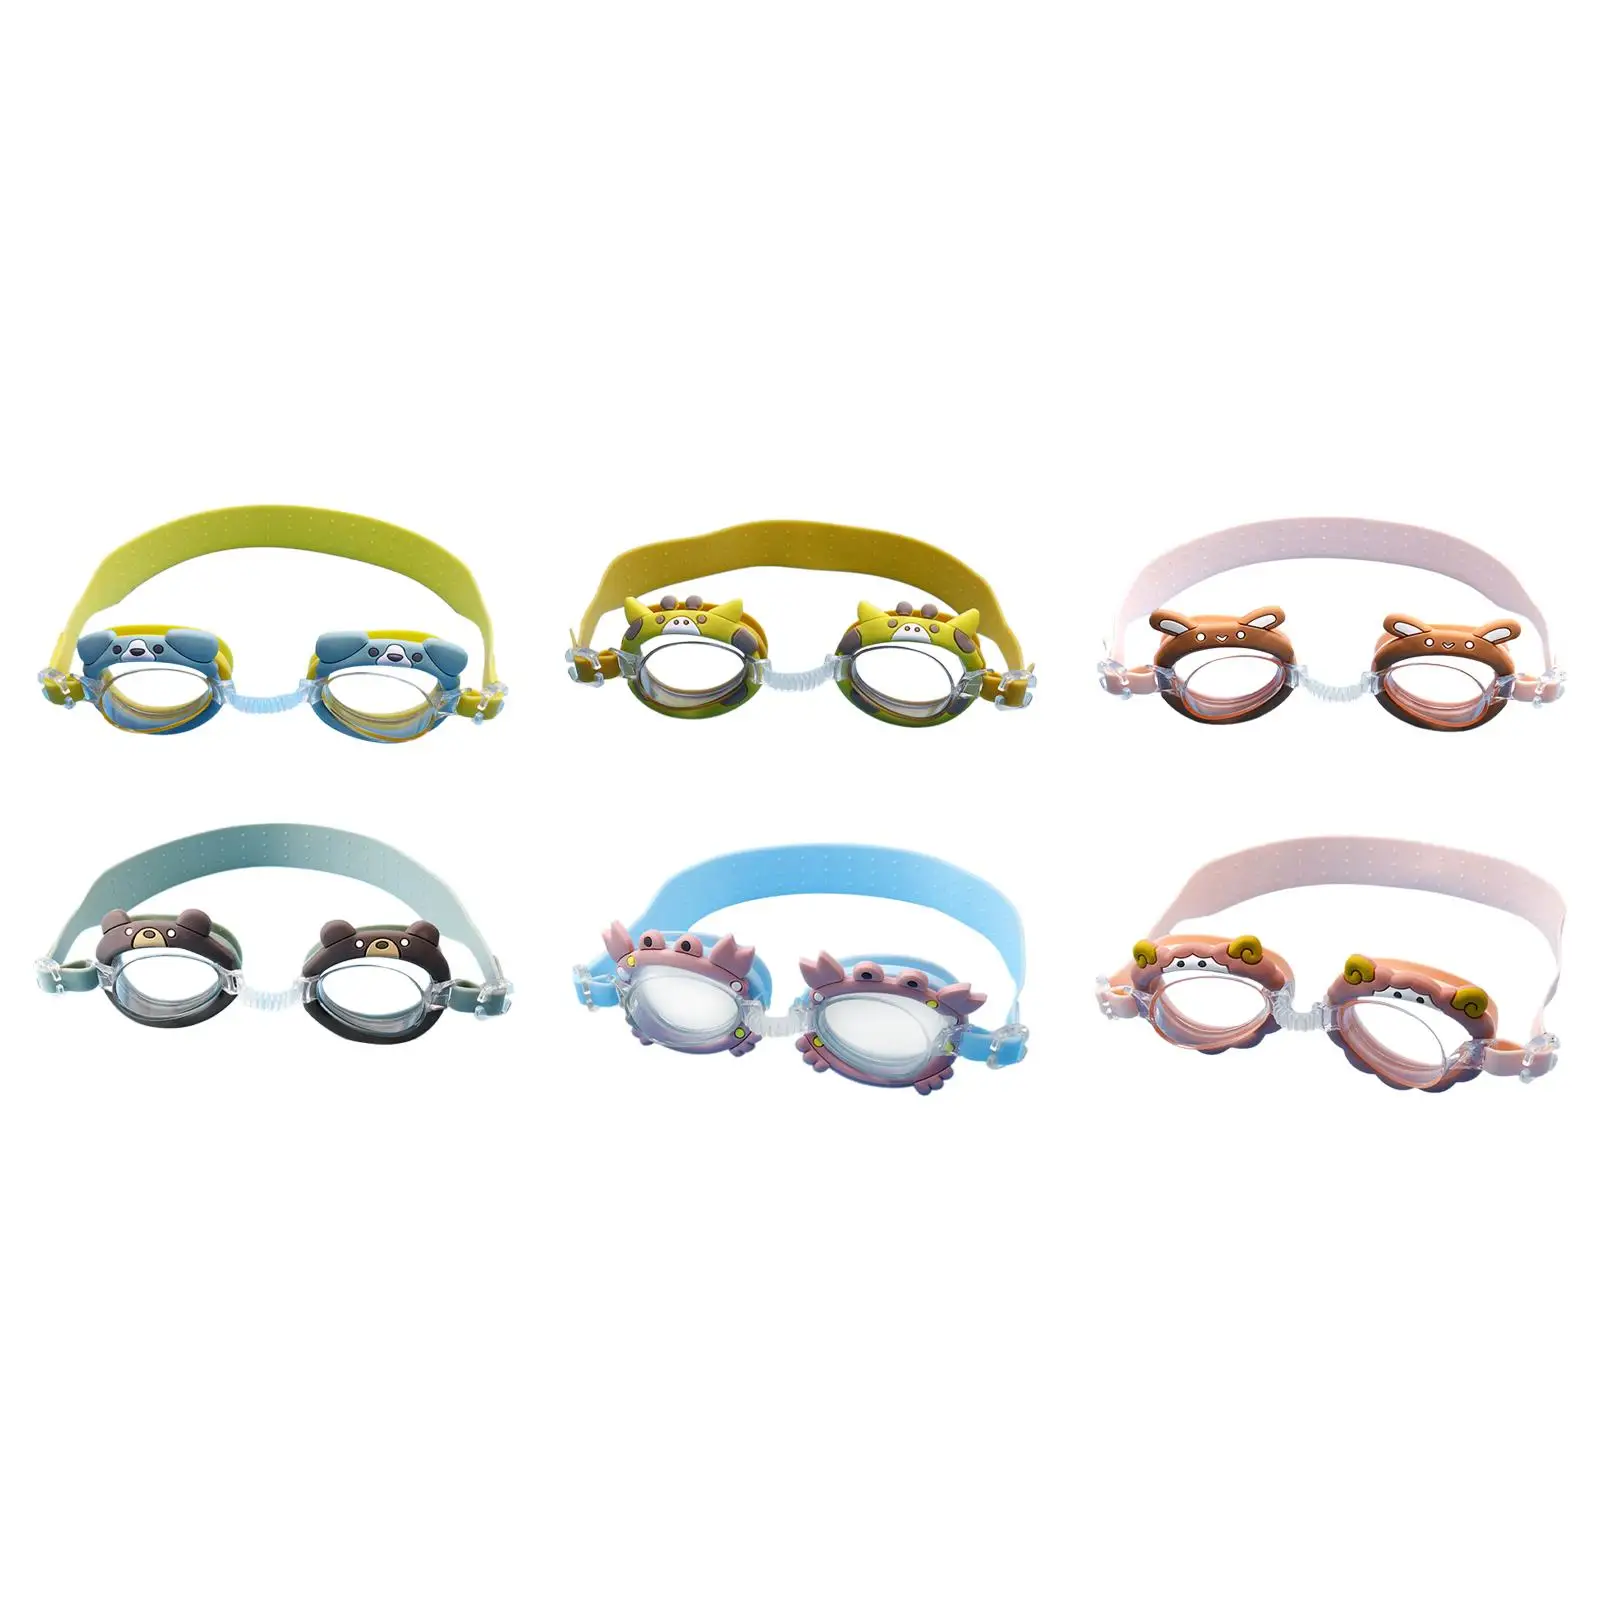 Carton Swimming Goggles Professional Clear View Swimming Glasses Swim Goggles for Kids for Child 2-12 Years Old Boys Girls Teens